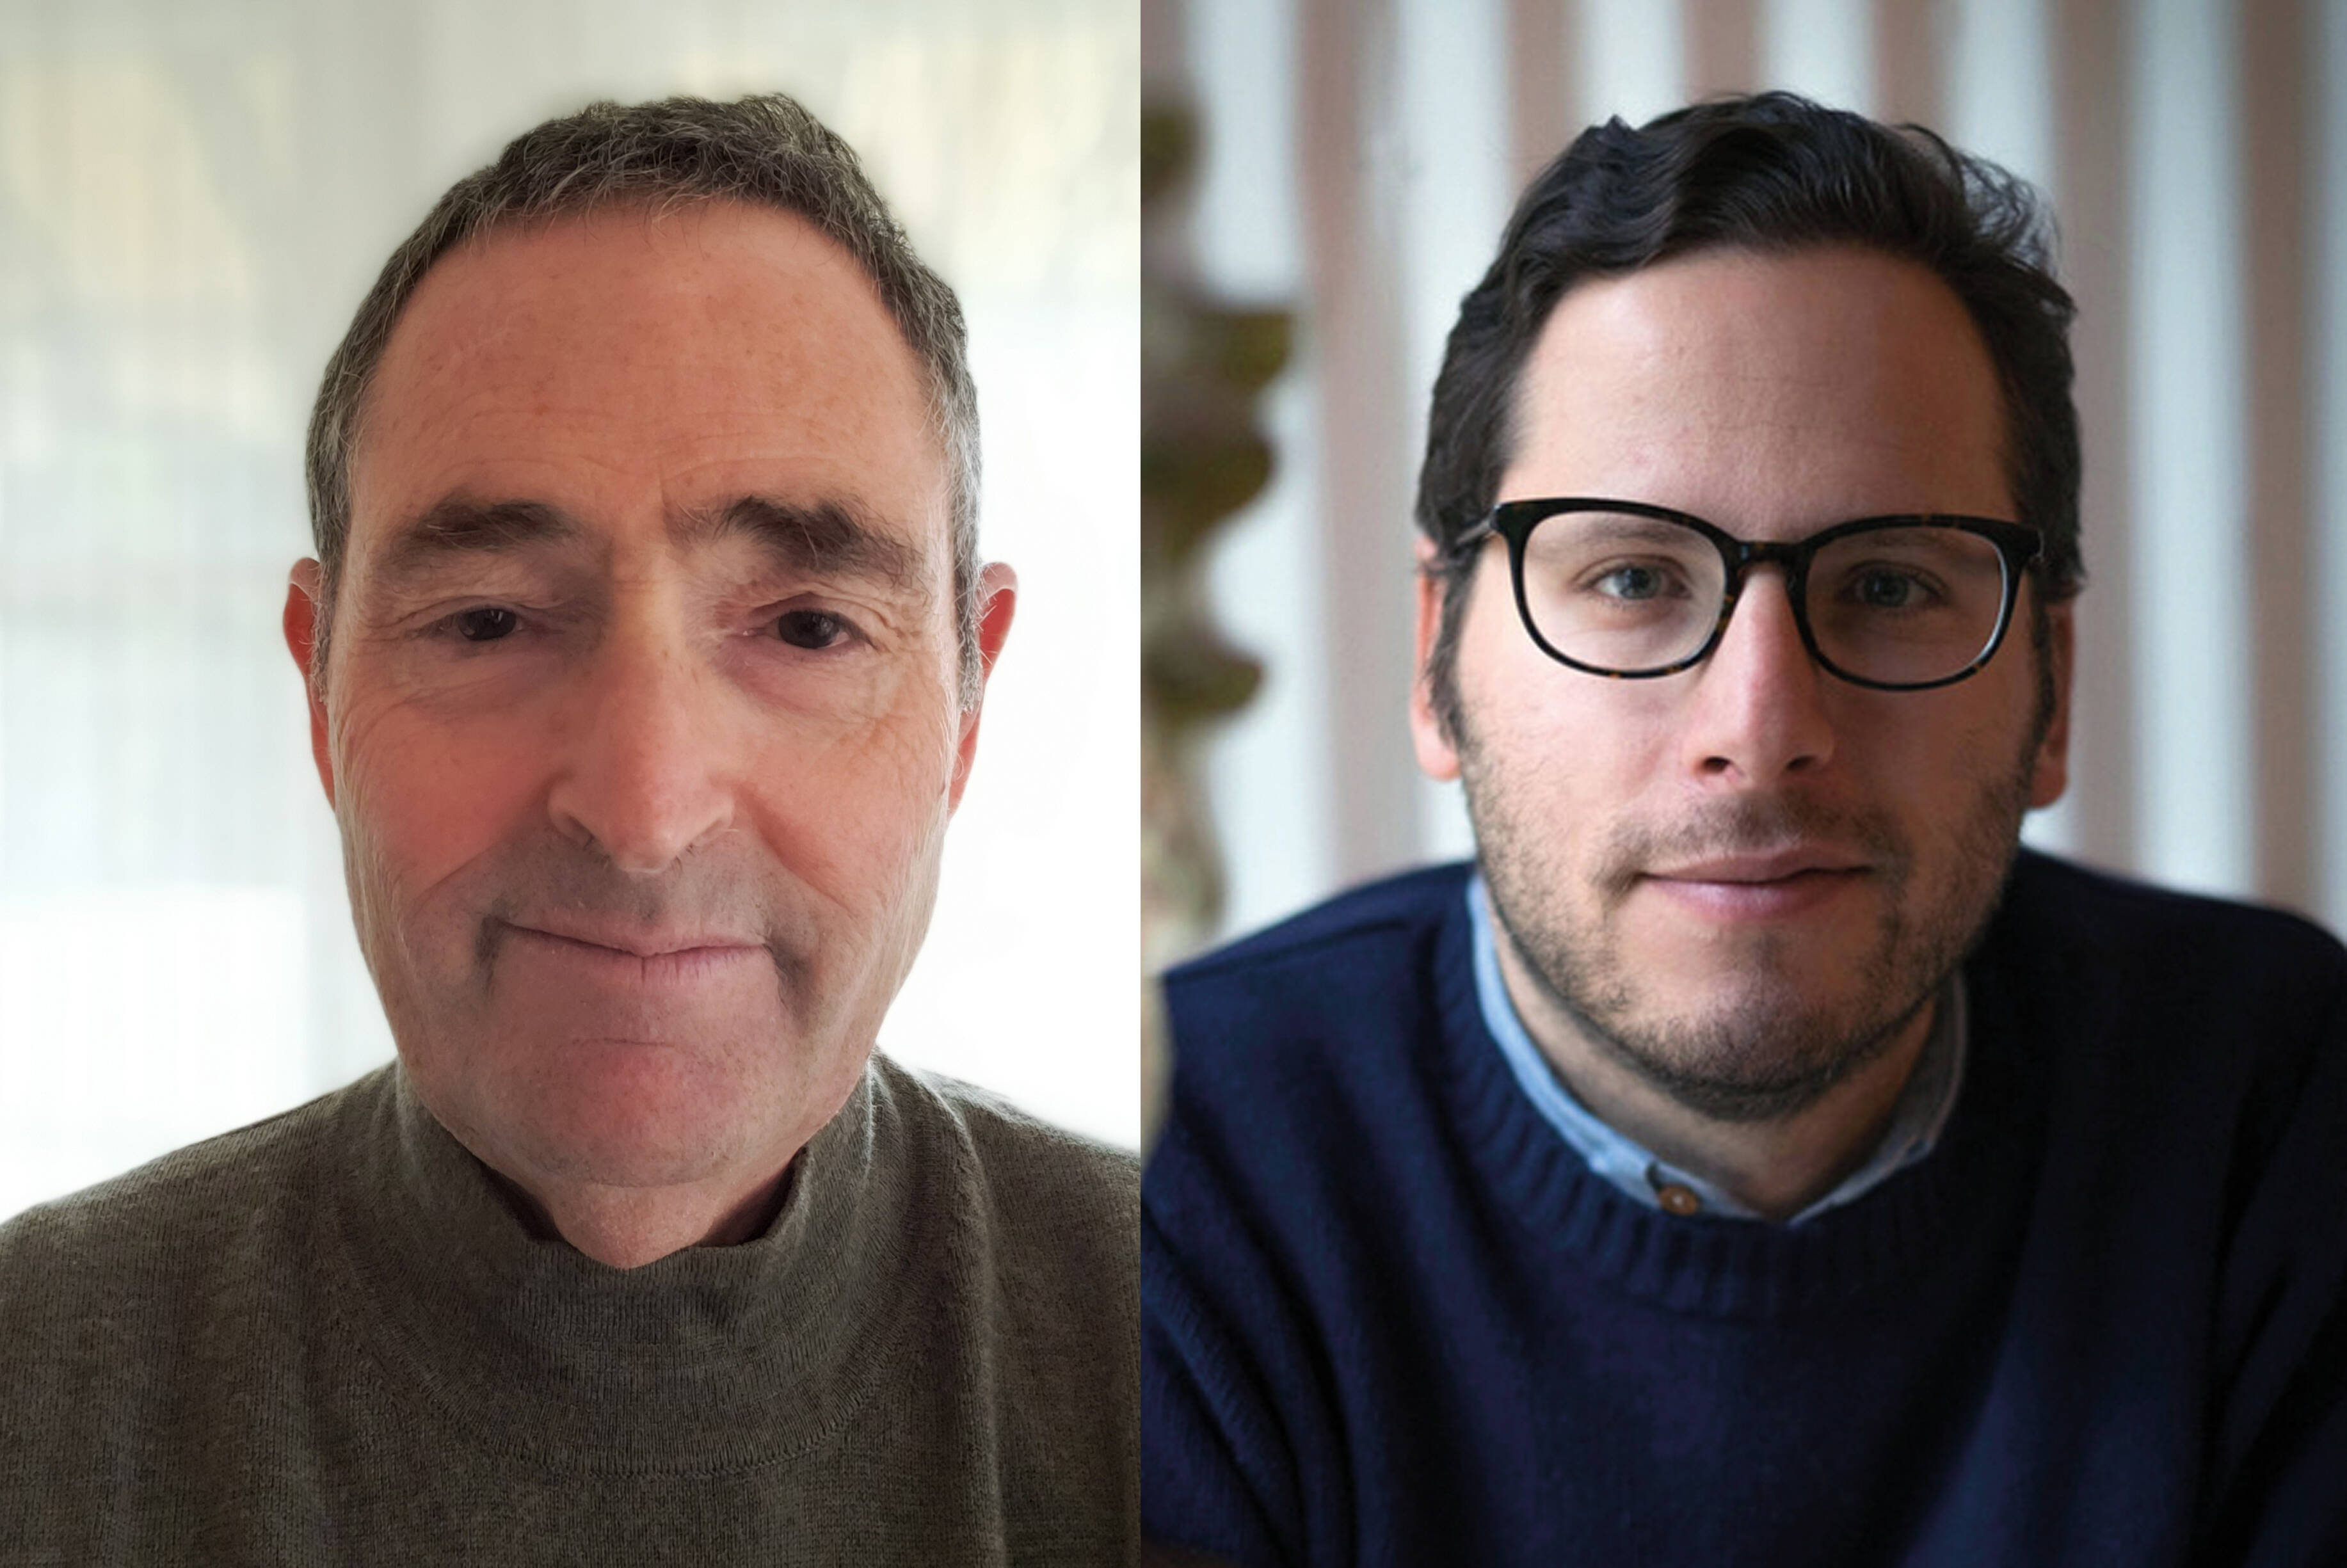 Sam Lubell and Greg Goldin tell you about their new book the Atlas of Never Built Architecture